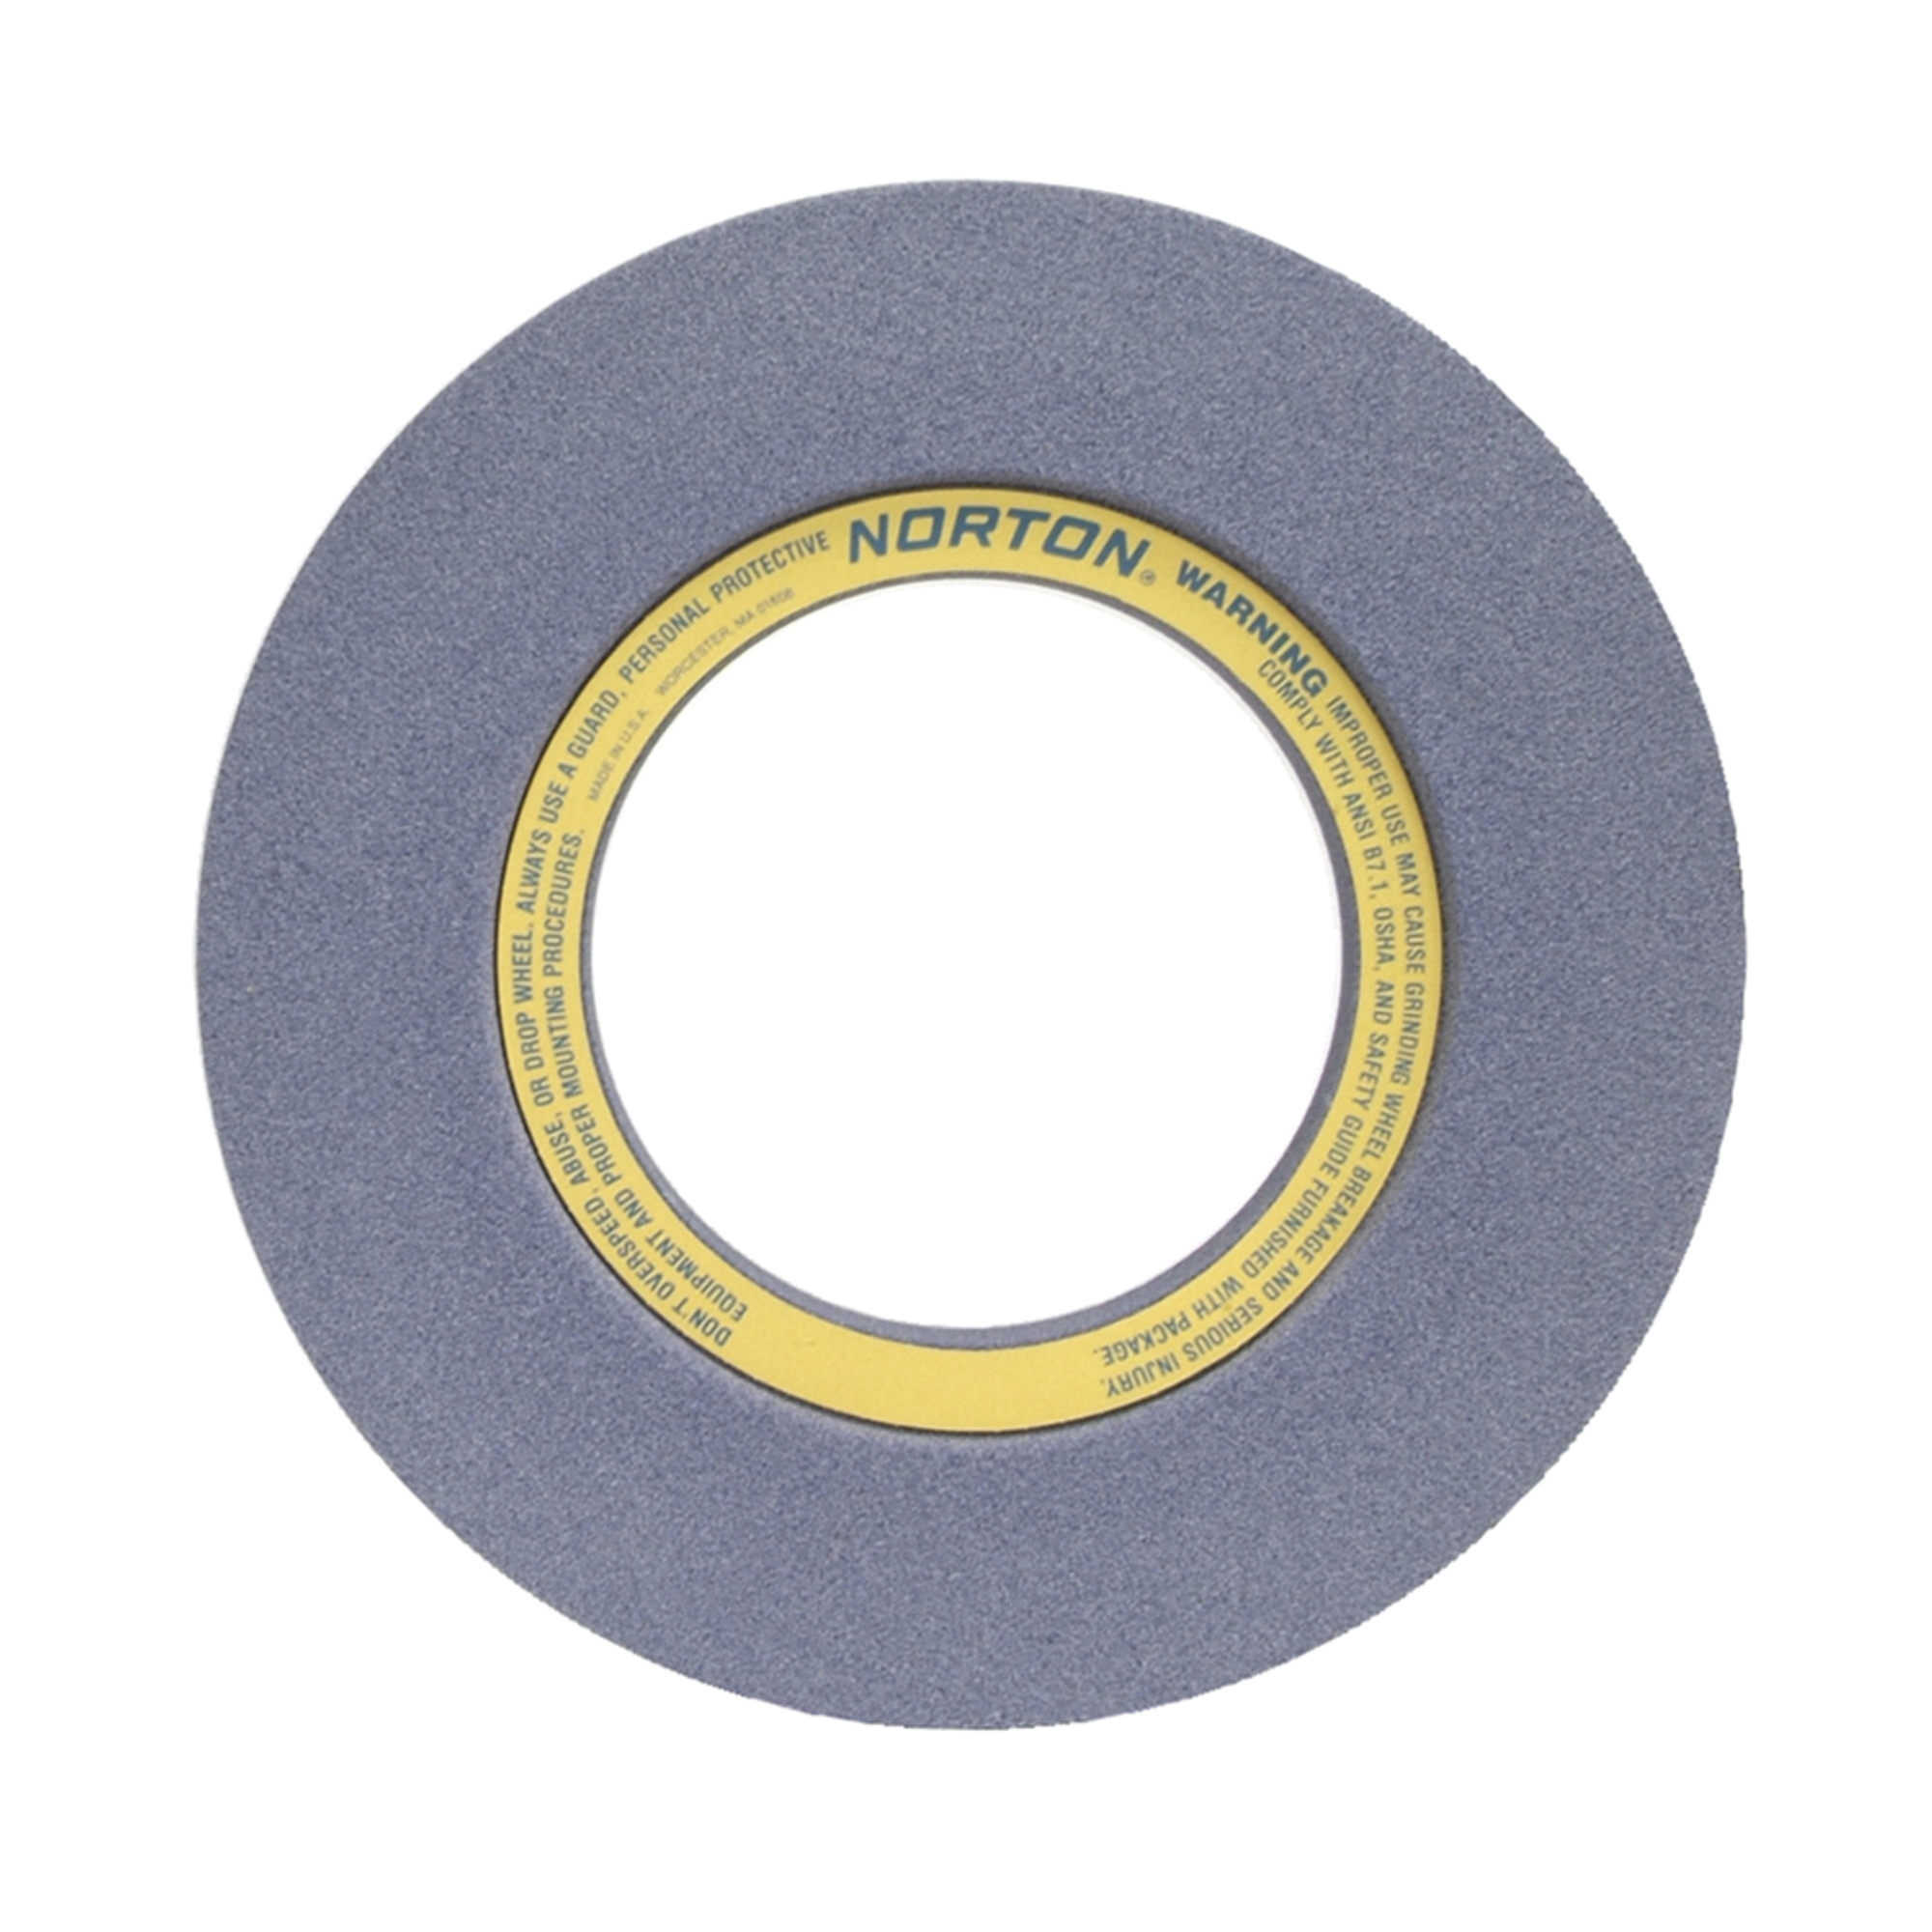 Norton® 69078665854 32A 2-Side Recessed Surface and Cylindrical Grinding Wheel, 20 in Dia x 6 in THK, 10 in Center Hole, 46 Grit, Aluminum Oxide Abrasive